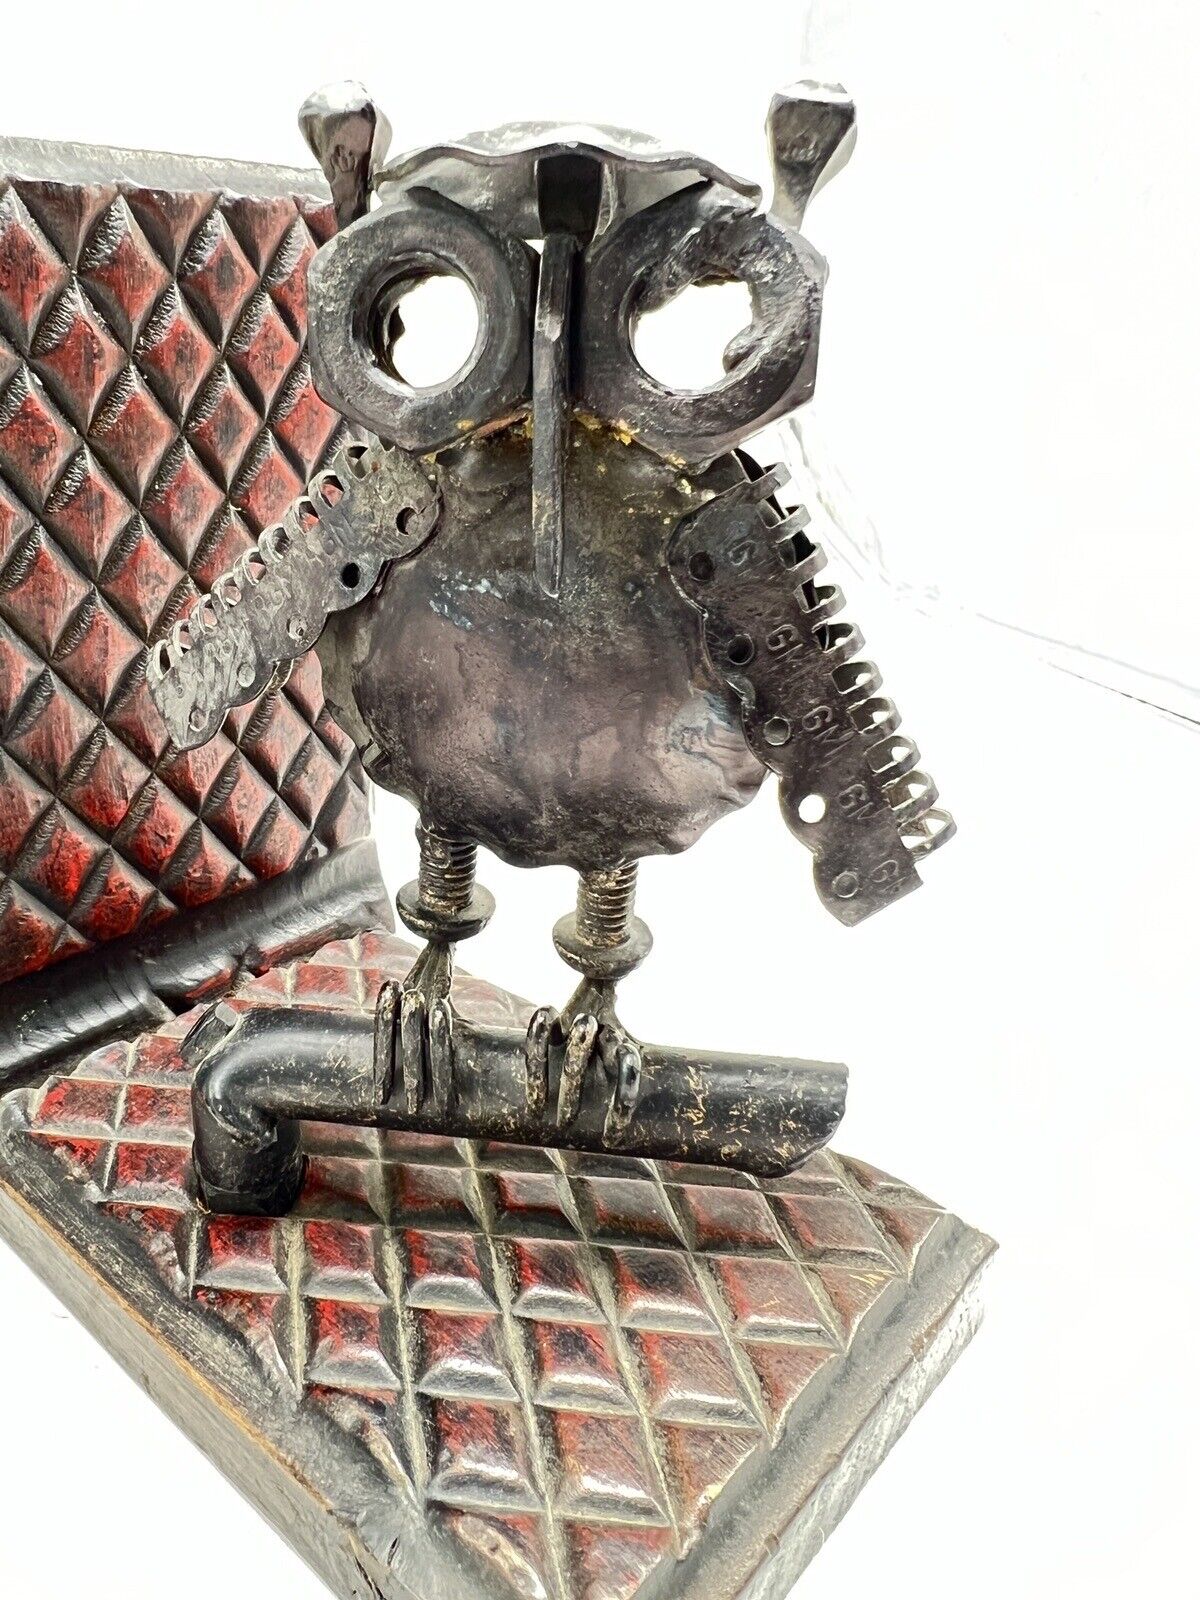 Steampunk Metal Art Owl Bookends Figurines Made in Spain Tag Mid Century Vintage